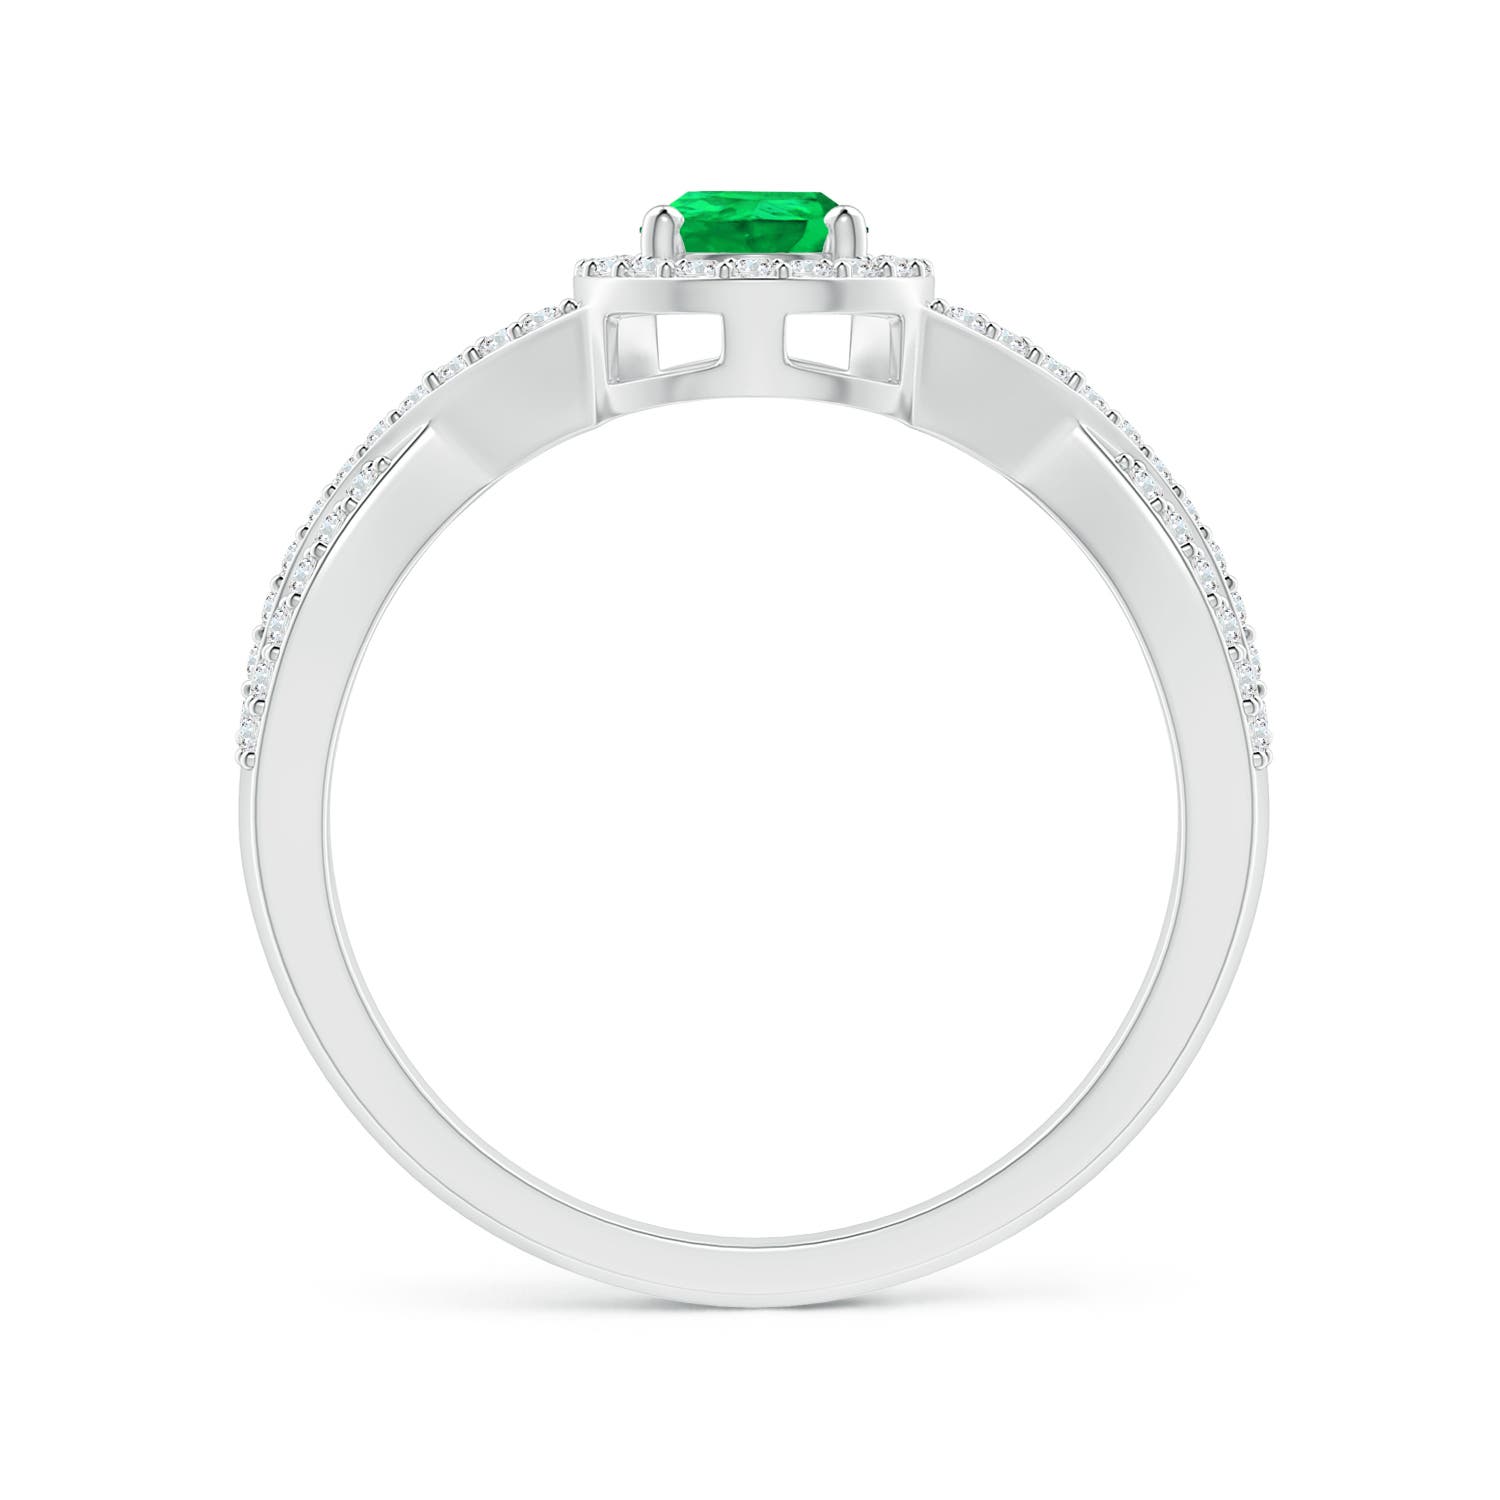 AAA - Emerald / 0.65 CT / 14 KT White Gold